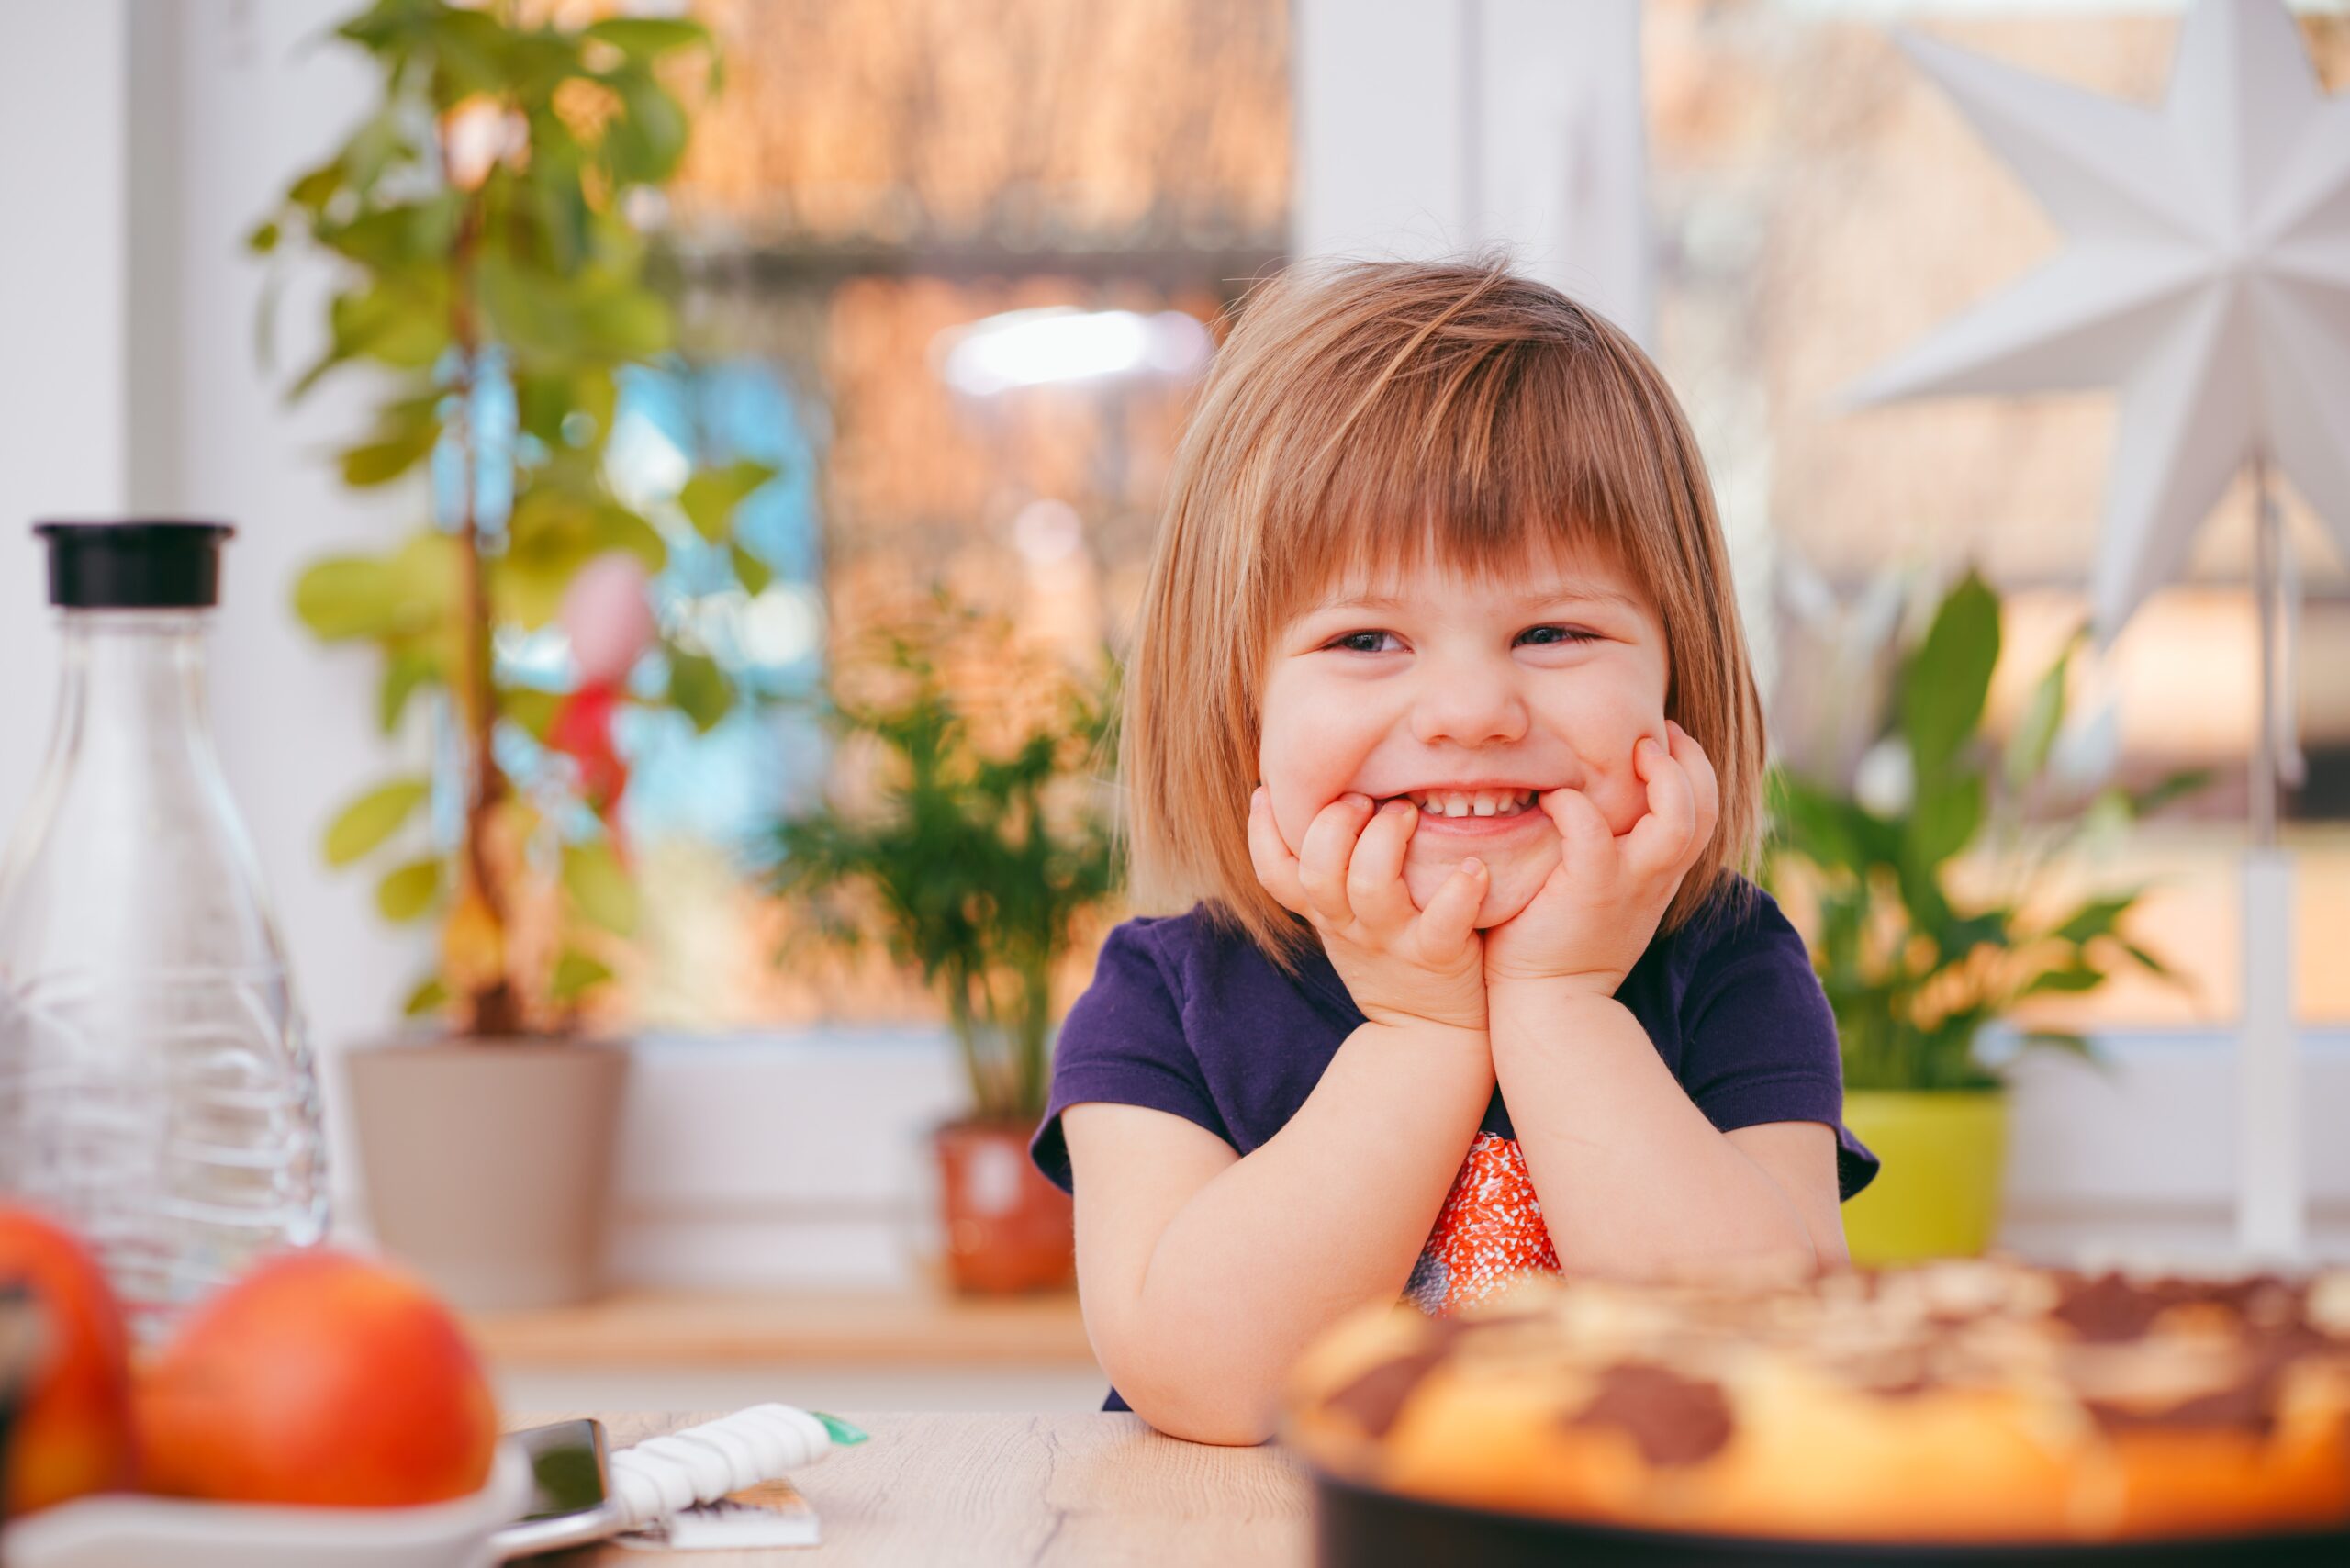 Toddler aged girl sitting at table with her elbows up and hands under her chin while smiling.